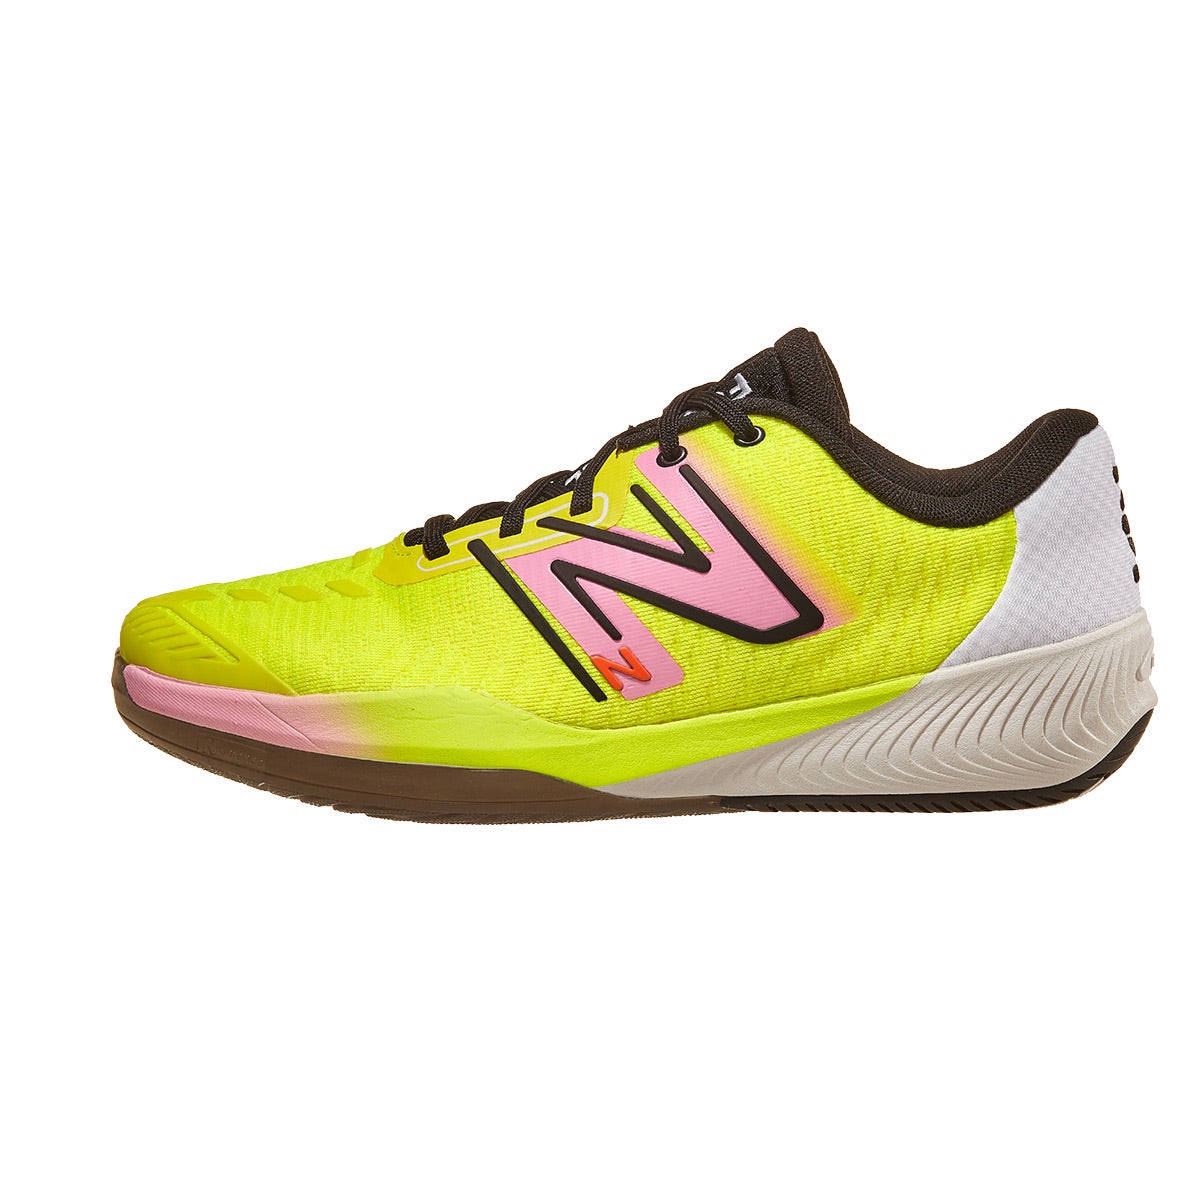 New Balance 996v5 D Pineapple/Rose Men's Shoes 360° View - Racquetball ...